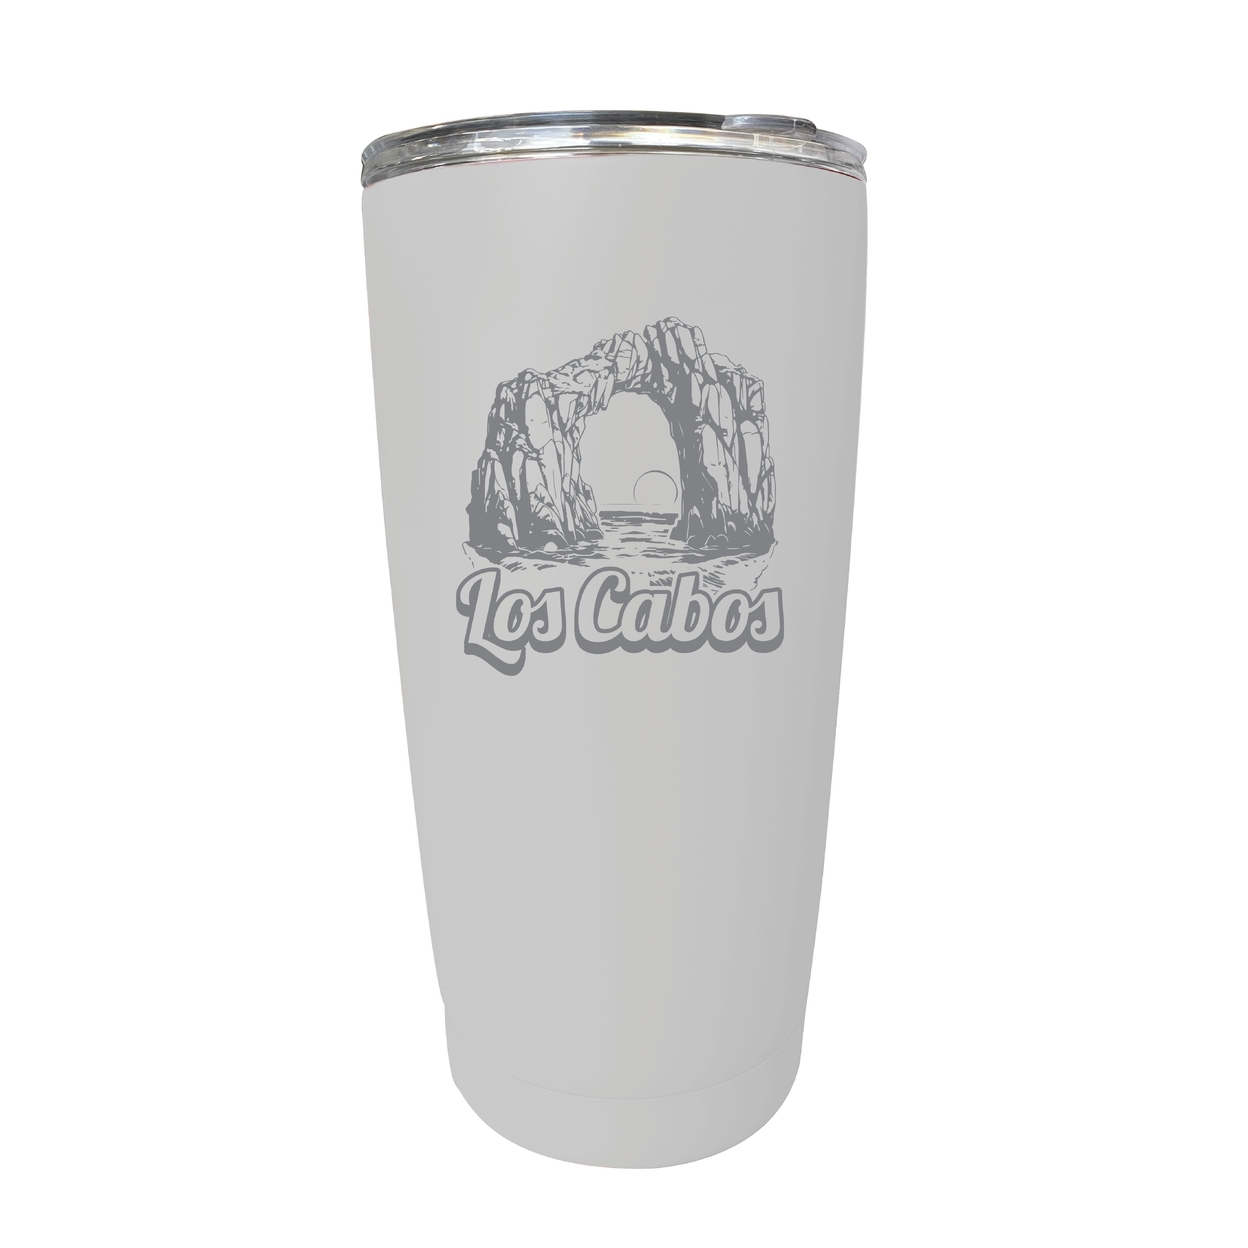 Los Cabos Mexico Souvenir 16 Oz Engraved Stainless Steel Insulated Tumbler - Purple,,2-Pack